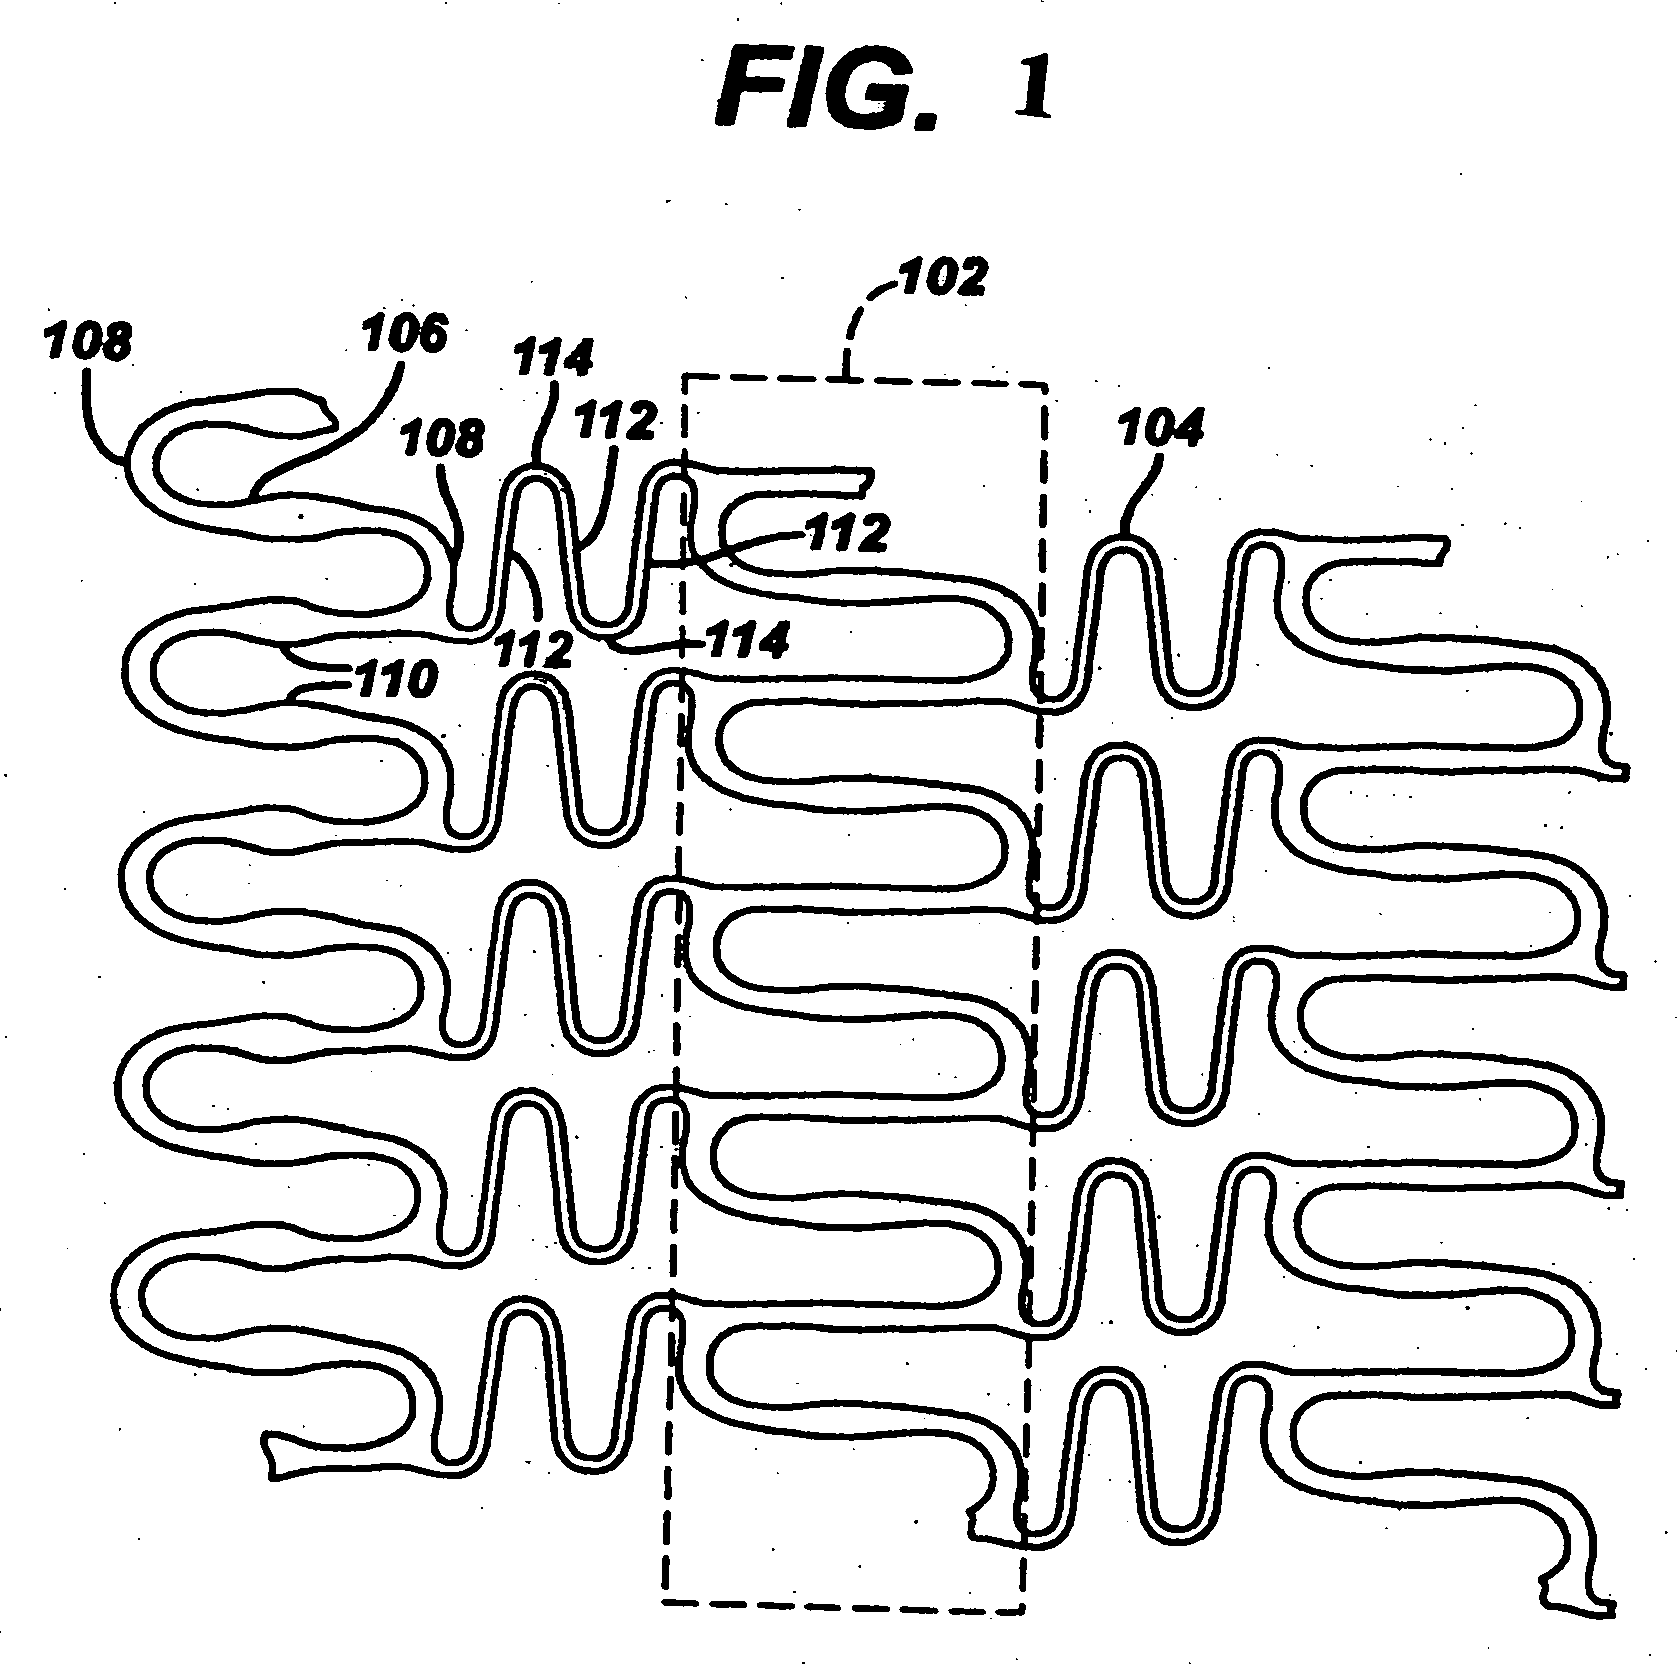 Polymeric stent having modified molecular structures in the flexible connections